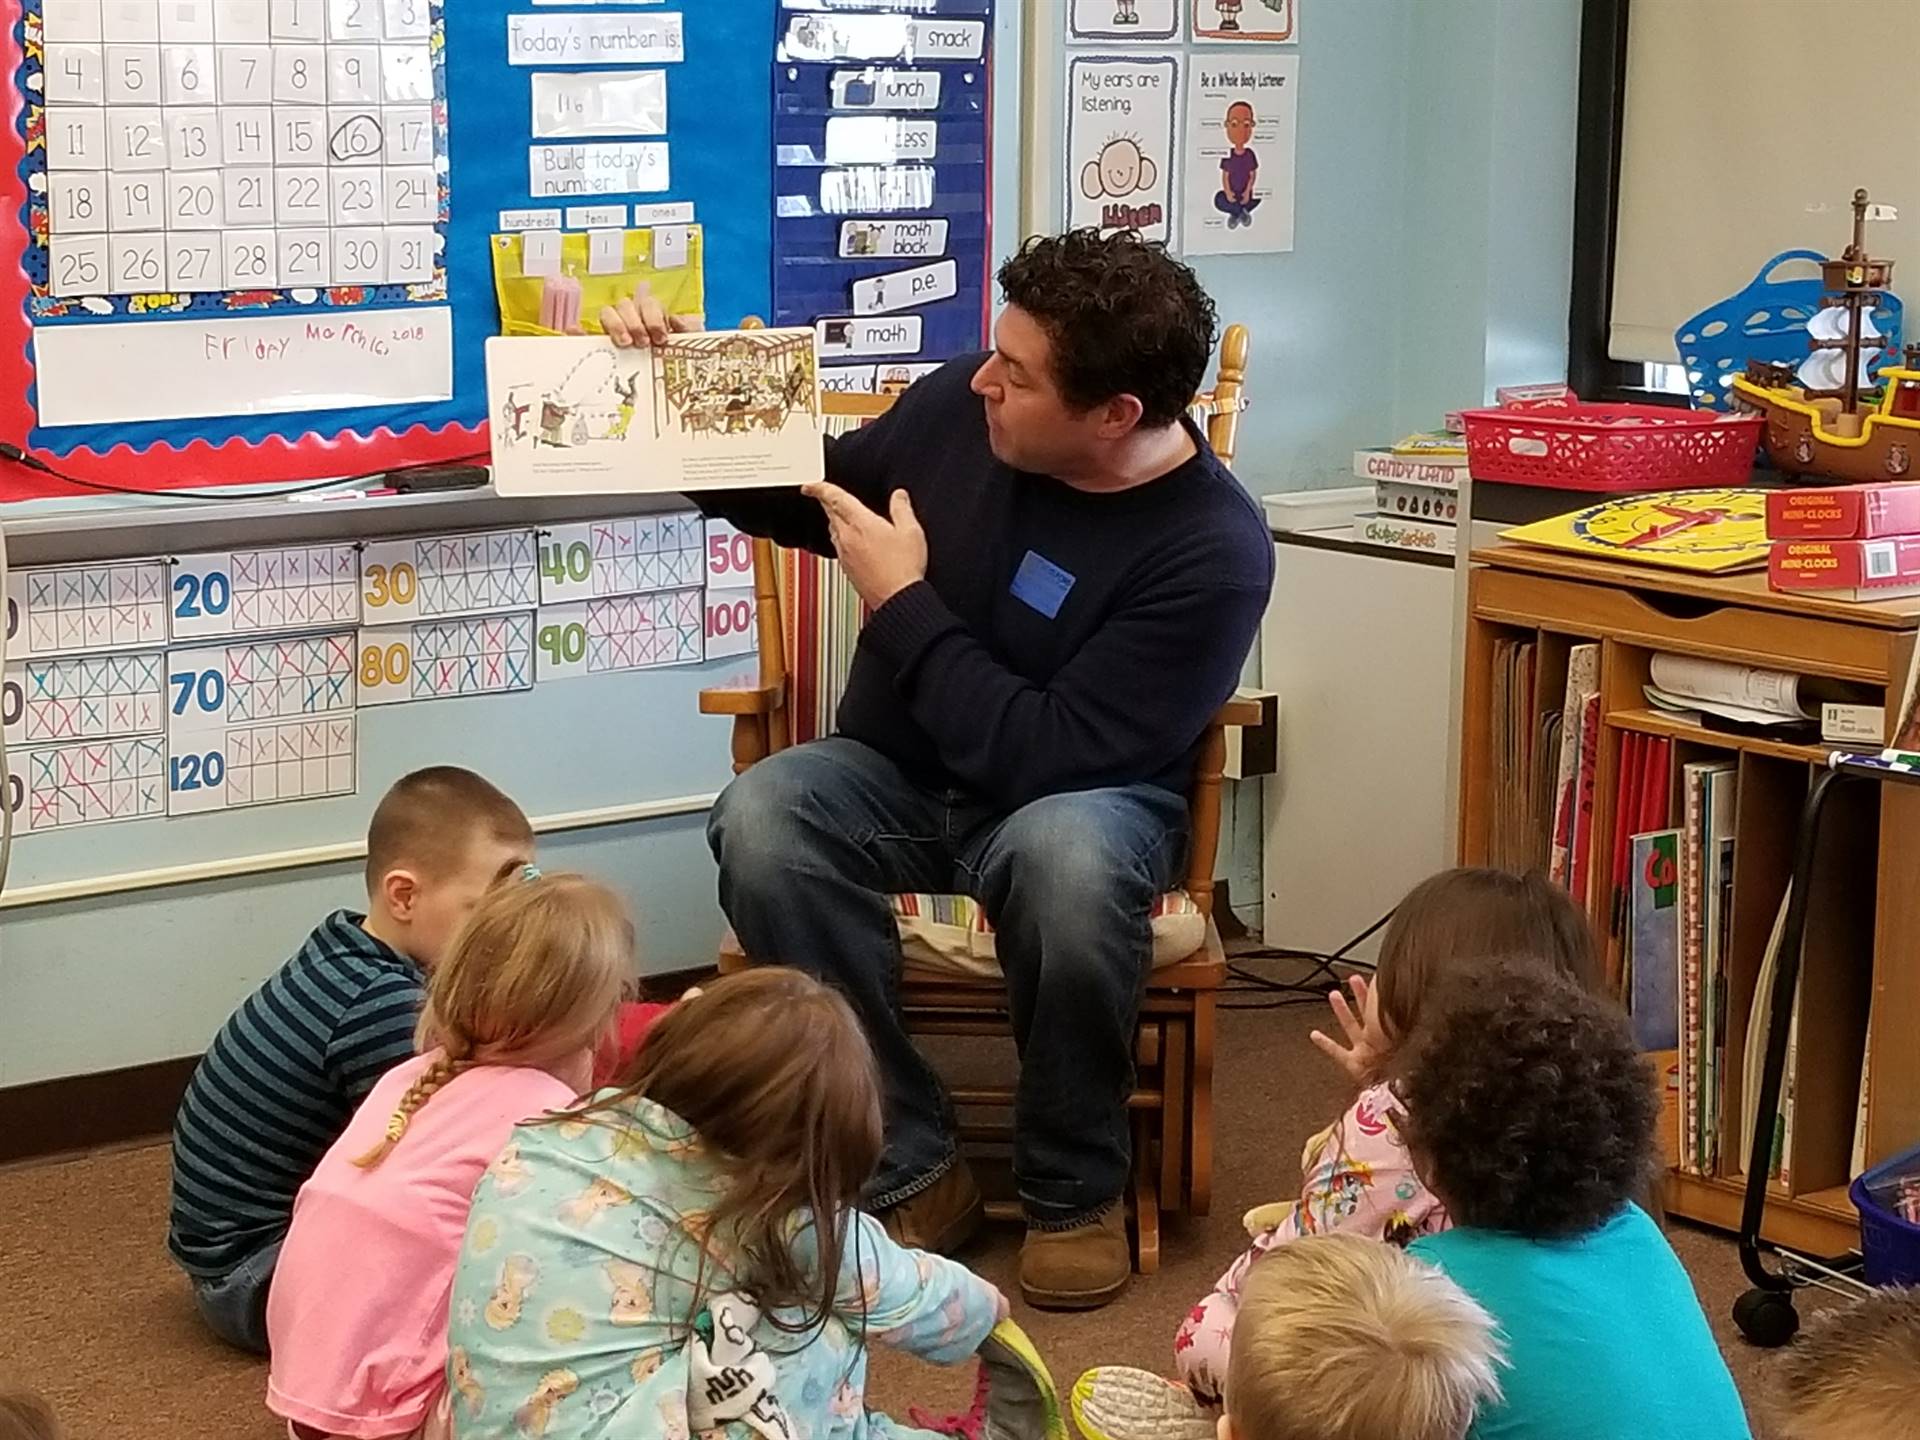 Father reads to children.